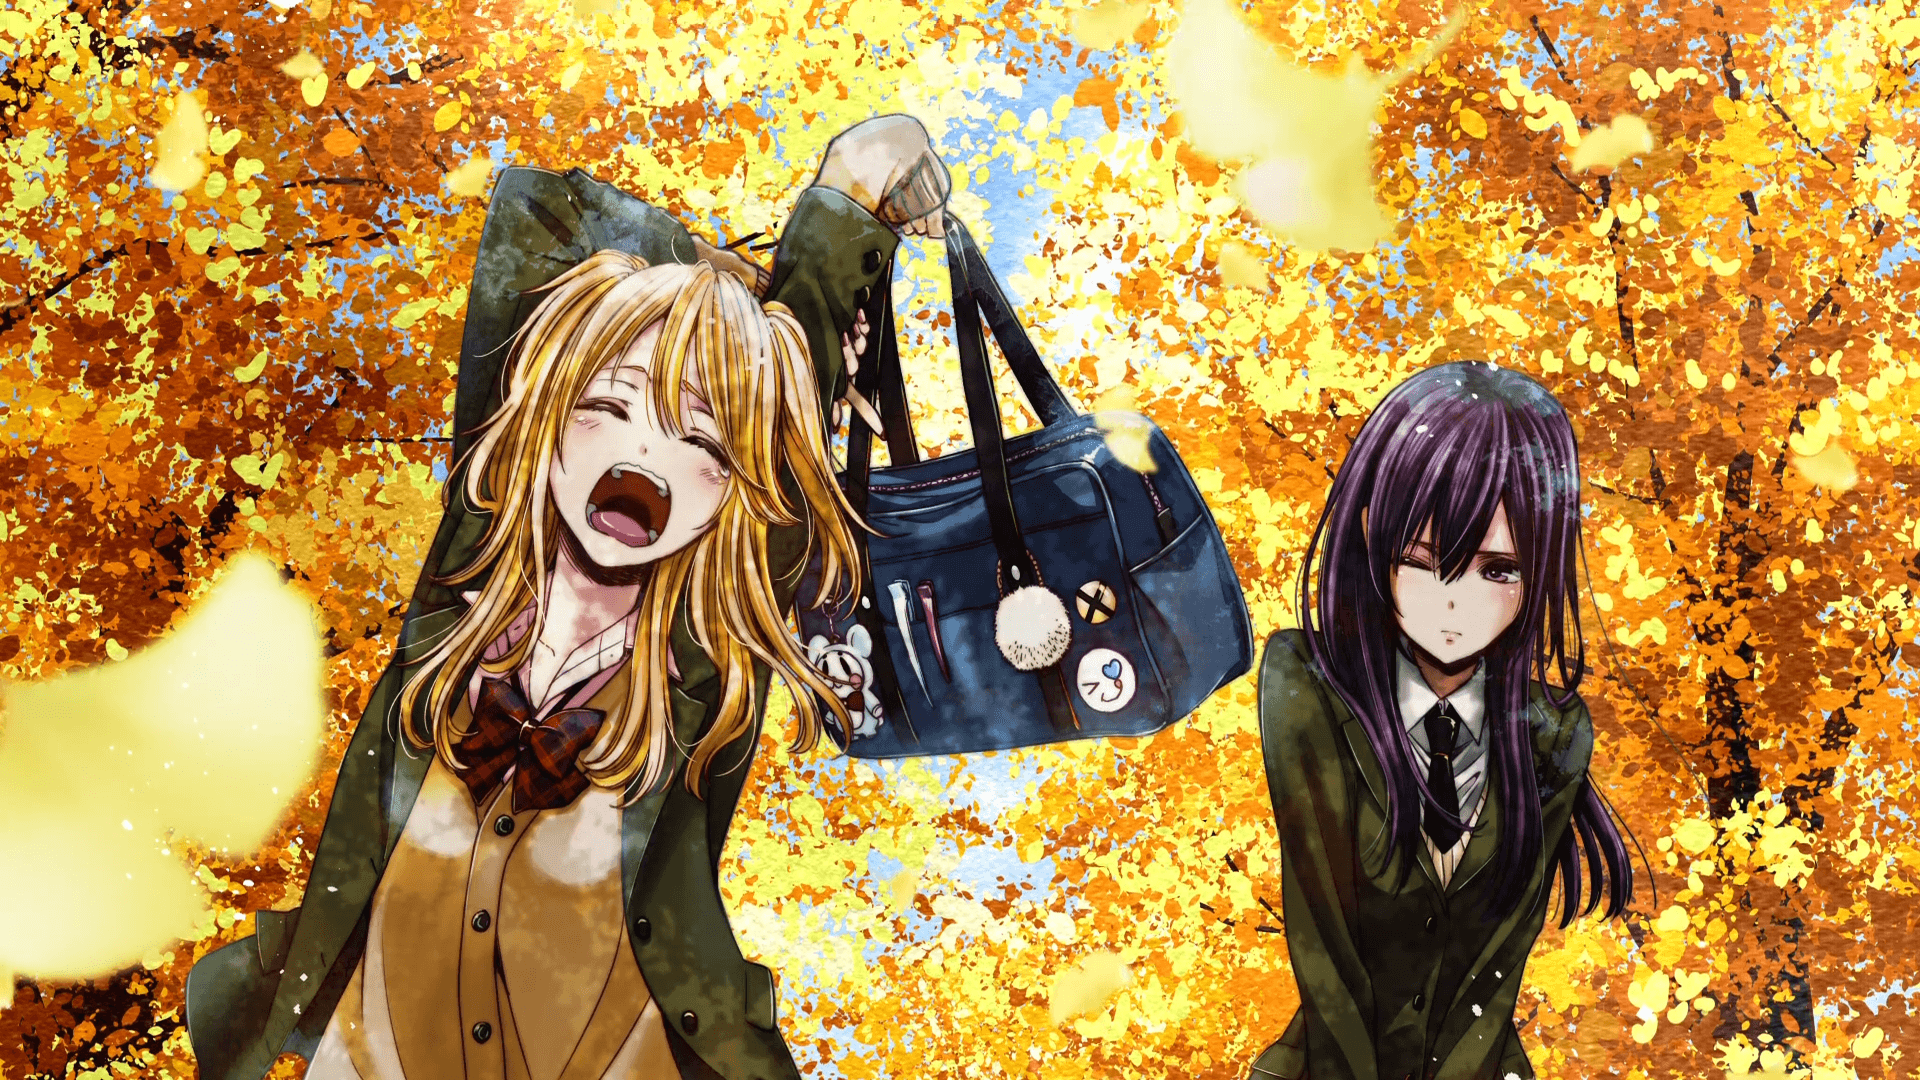 Citrus HD Wallpaper and Background Image